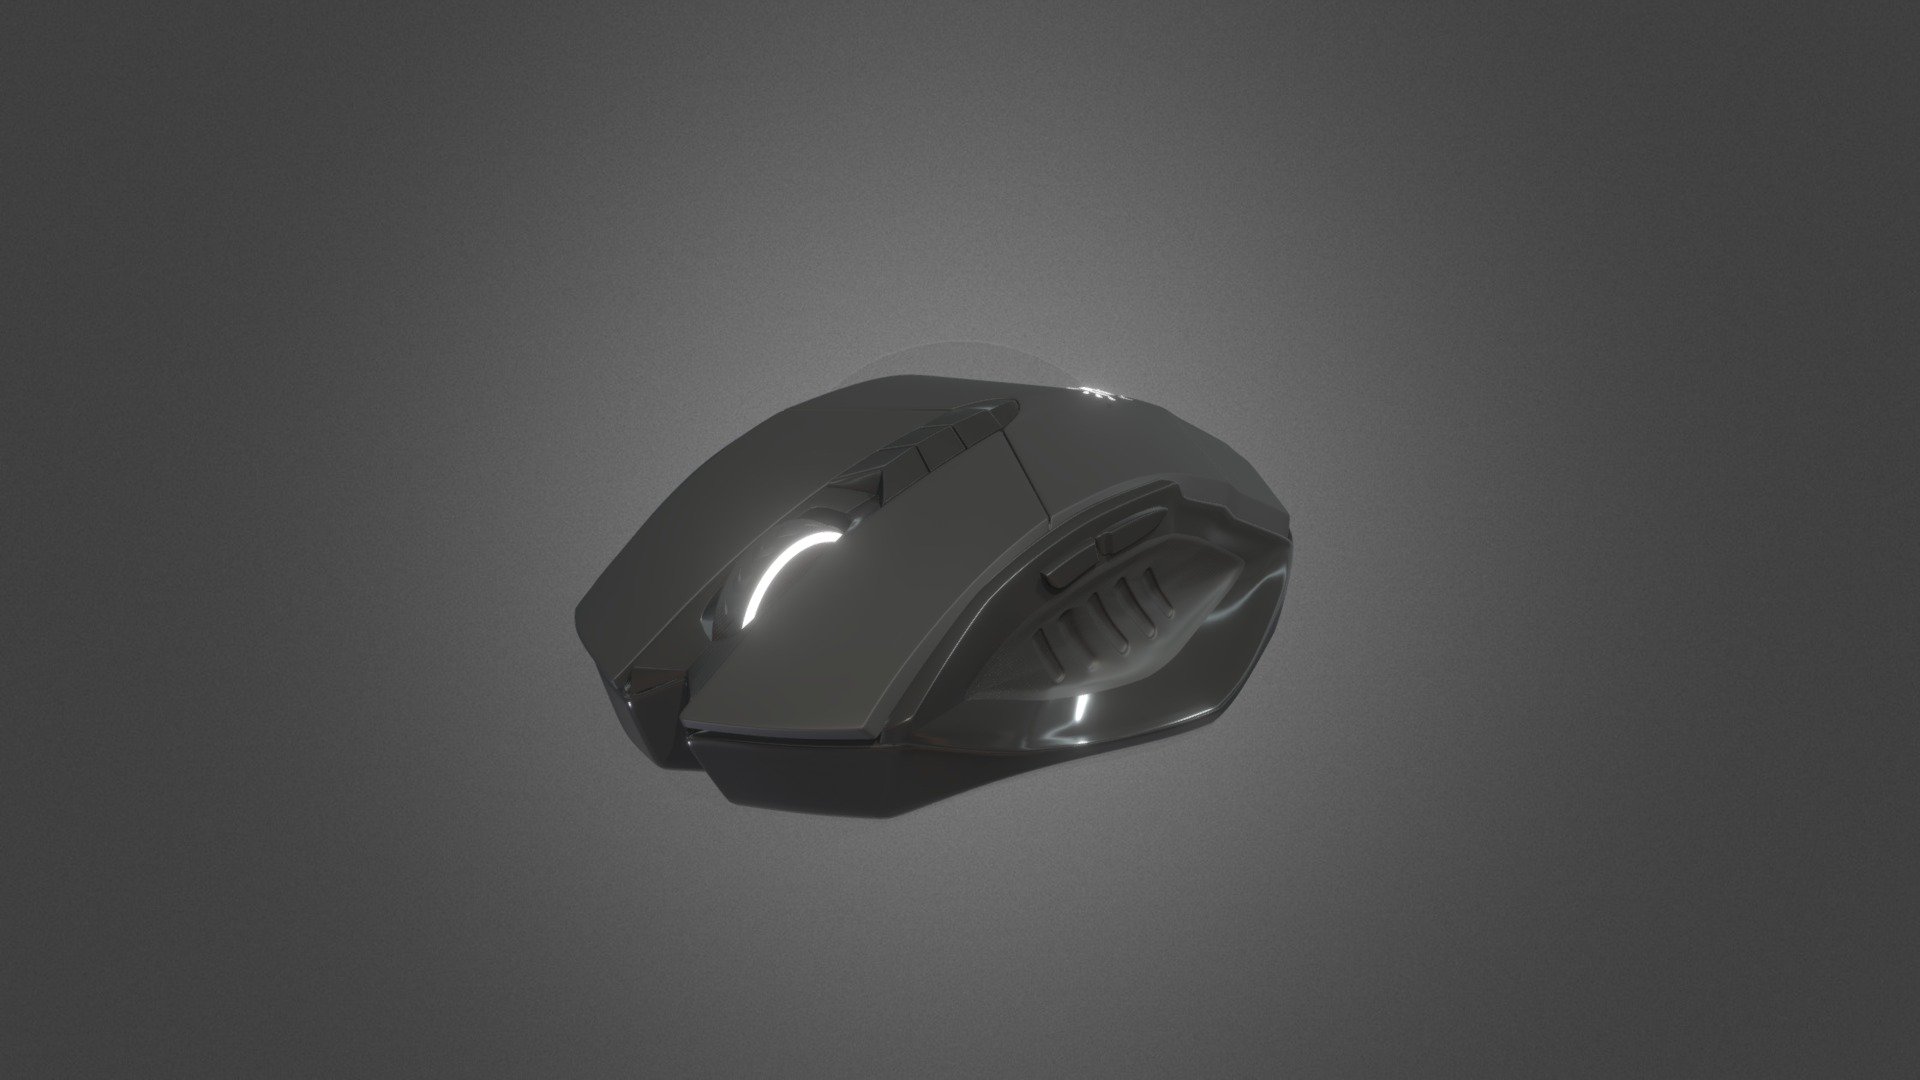 Mouse

If you'll use Blender (2.79 - 2.8), you will have materials as I do in my preview renders.

This model consists of several objects. Modifiers are not applied for the blend file. For other formats modifiers were applied 3d model